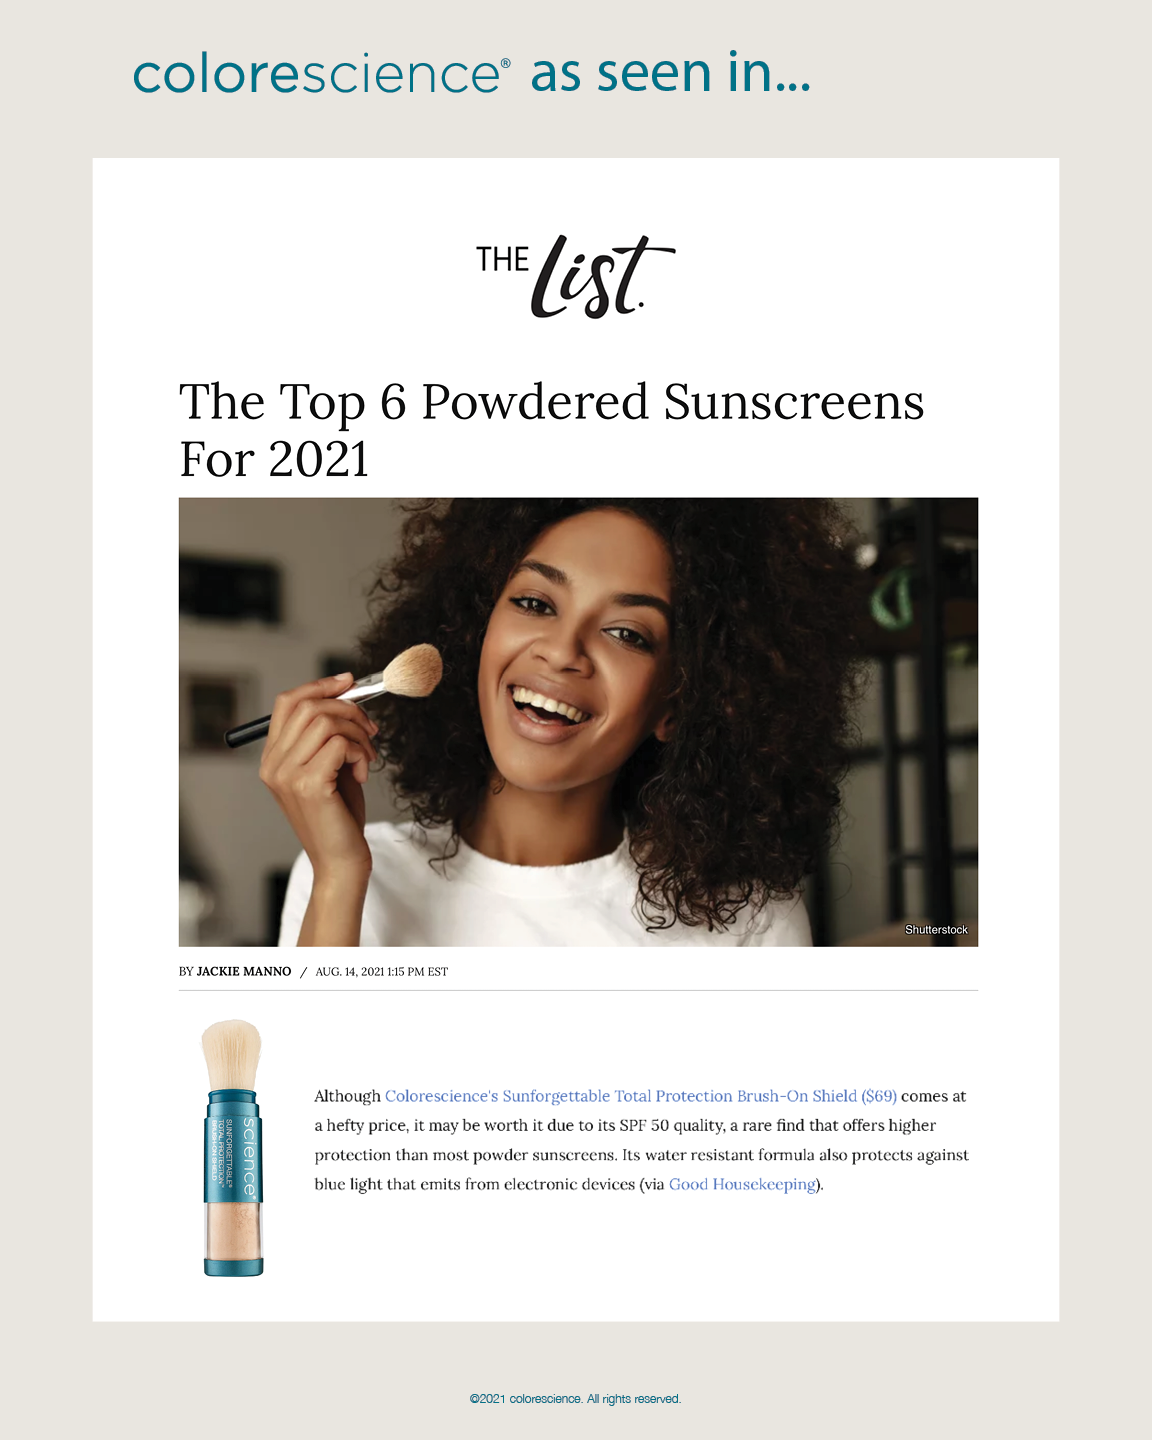 The Top Powdered Sunscreens For 2021